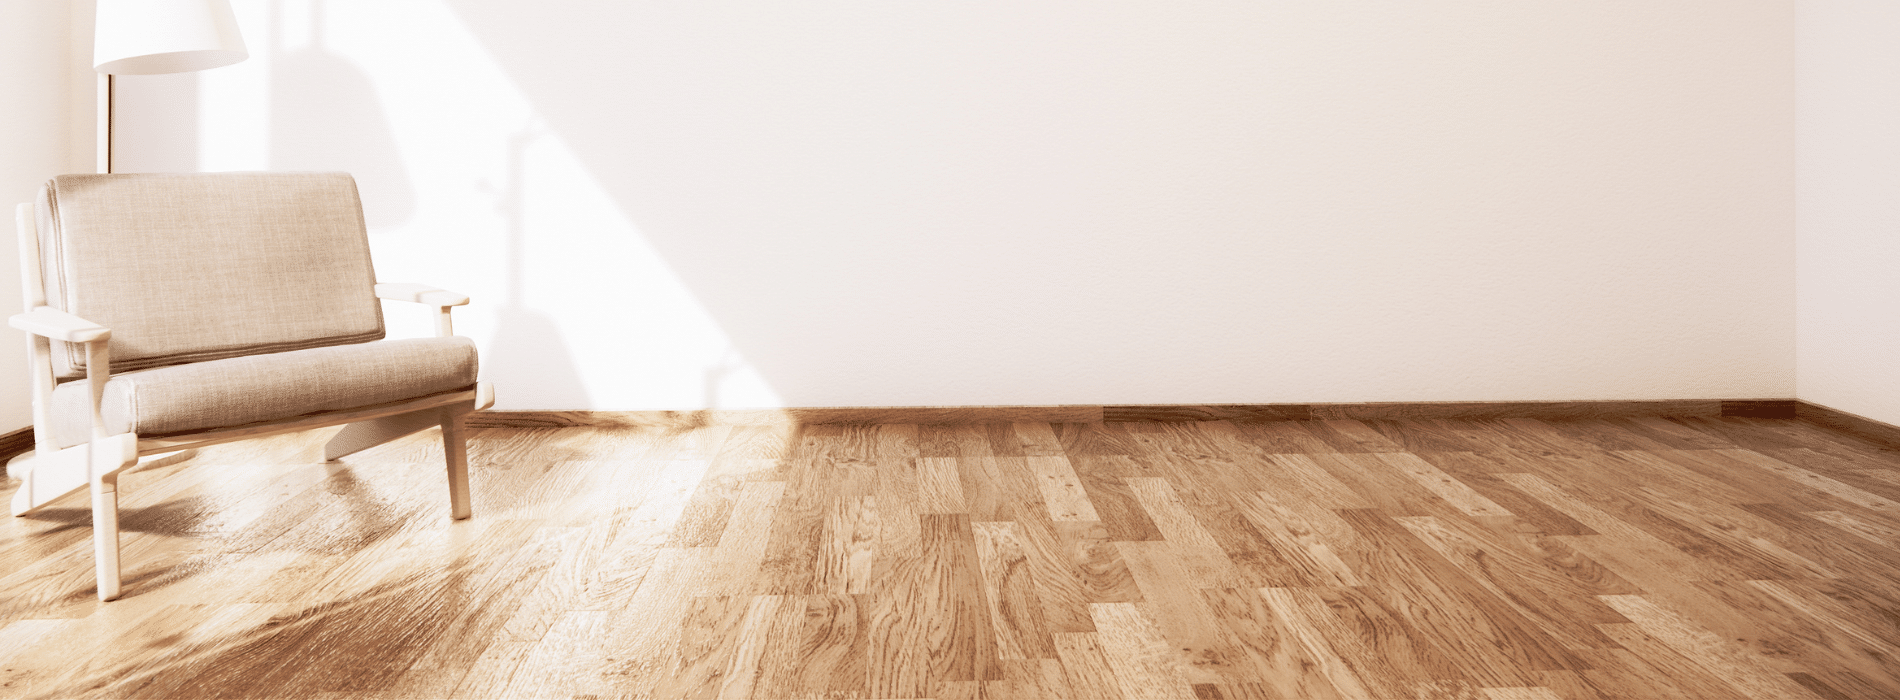 Revitalized five-year-old engineered oak floors in Hainault, IG7. Enhanced with a mid-oak stain, the warm and inviting appearance is brought back to life by Mr Sander®. Protected by four coats of Junckers Strong satin finish for lasting durability. Witness the stunning transformation.